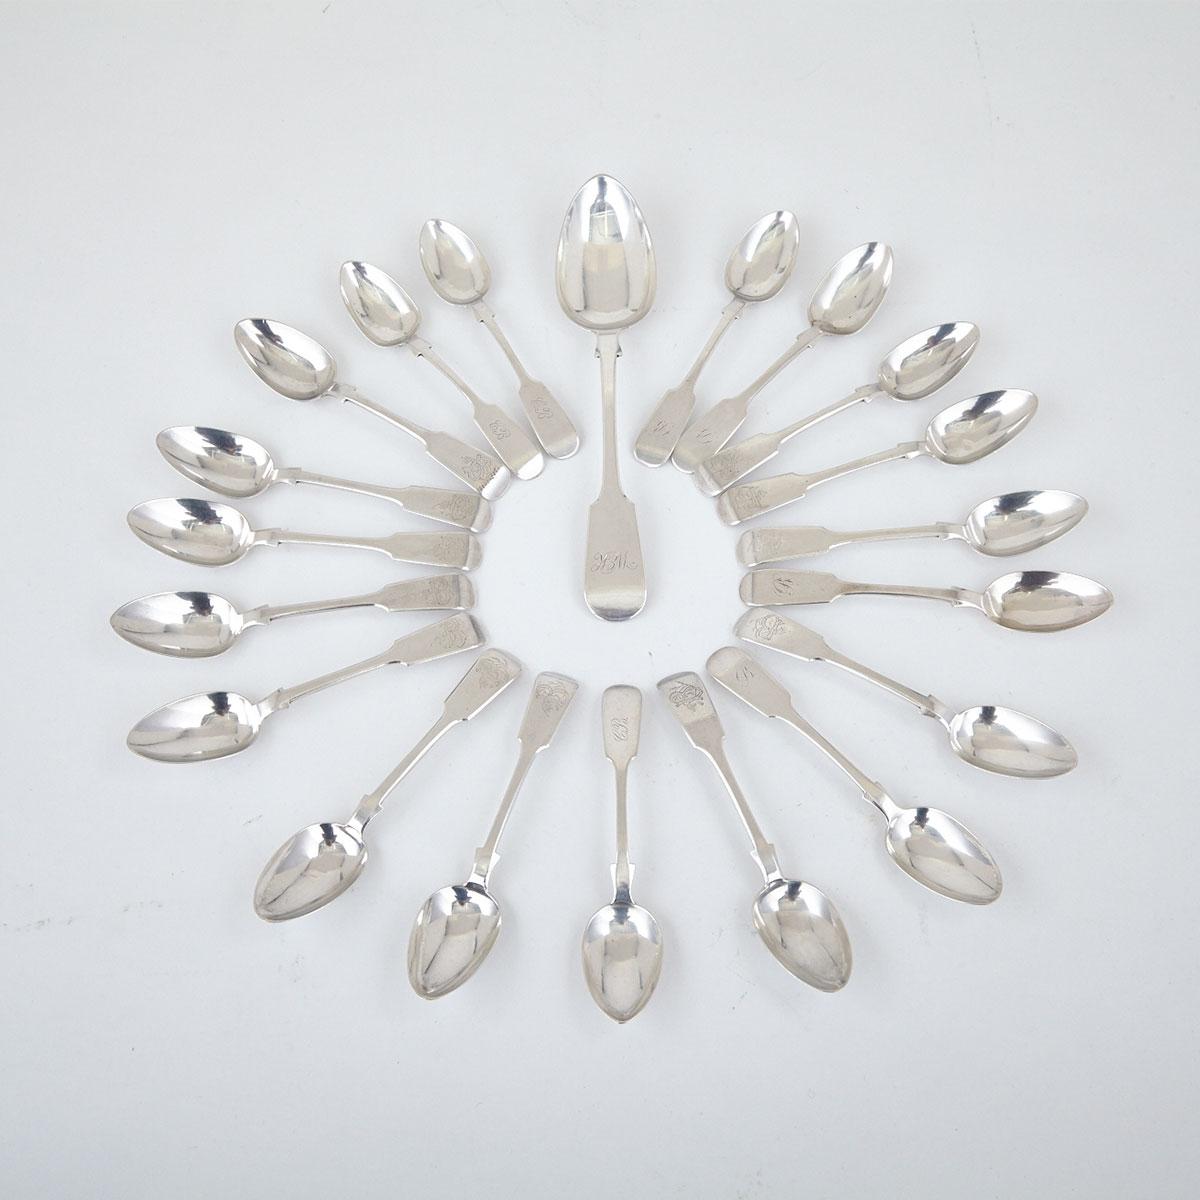 Nineteen Canadian Silver Fiddle Pattern Tea Spoons and a Table Spoon, various Montreal and Ontario makers, 19th century